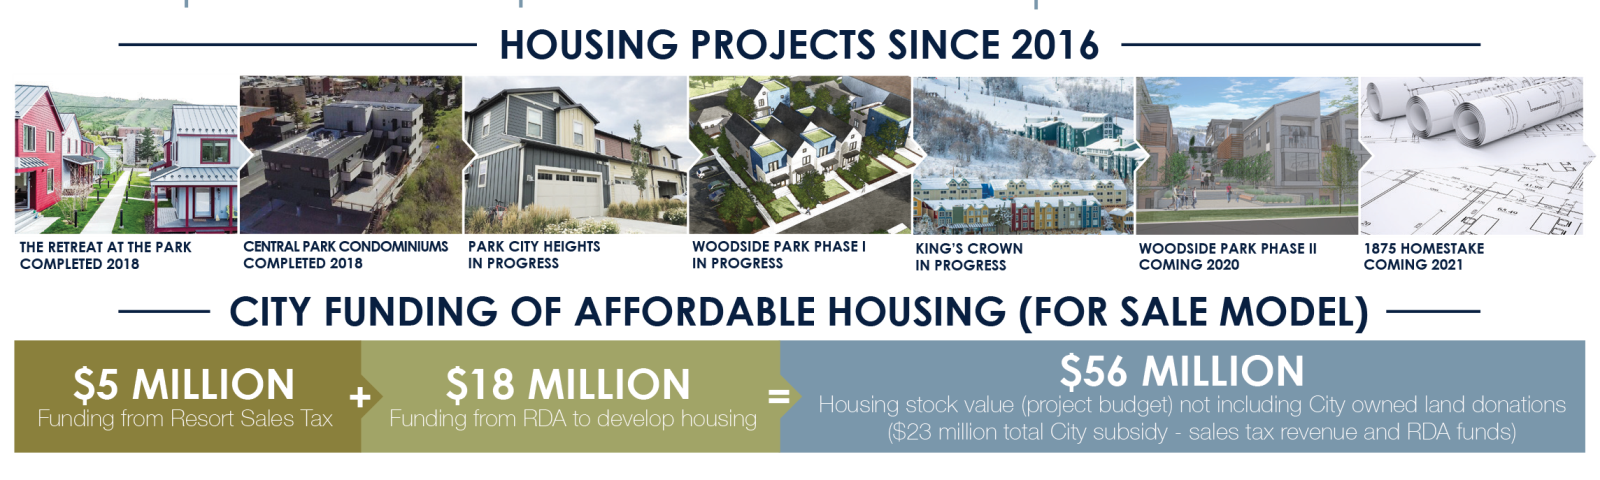 Housing Timeline Graphic_Web